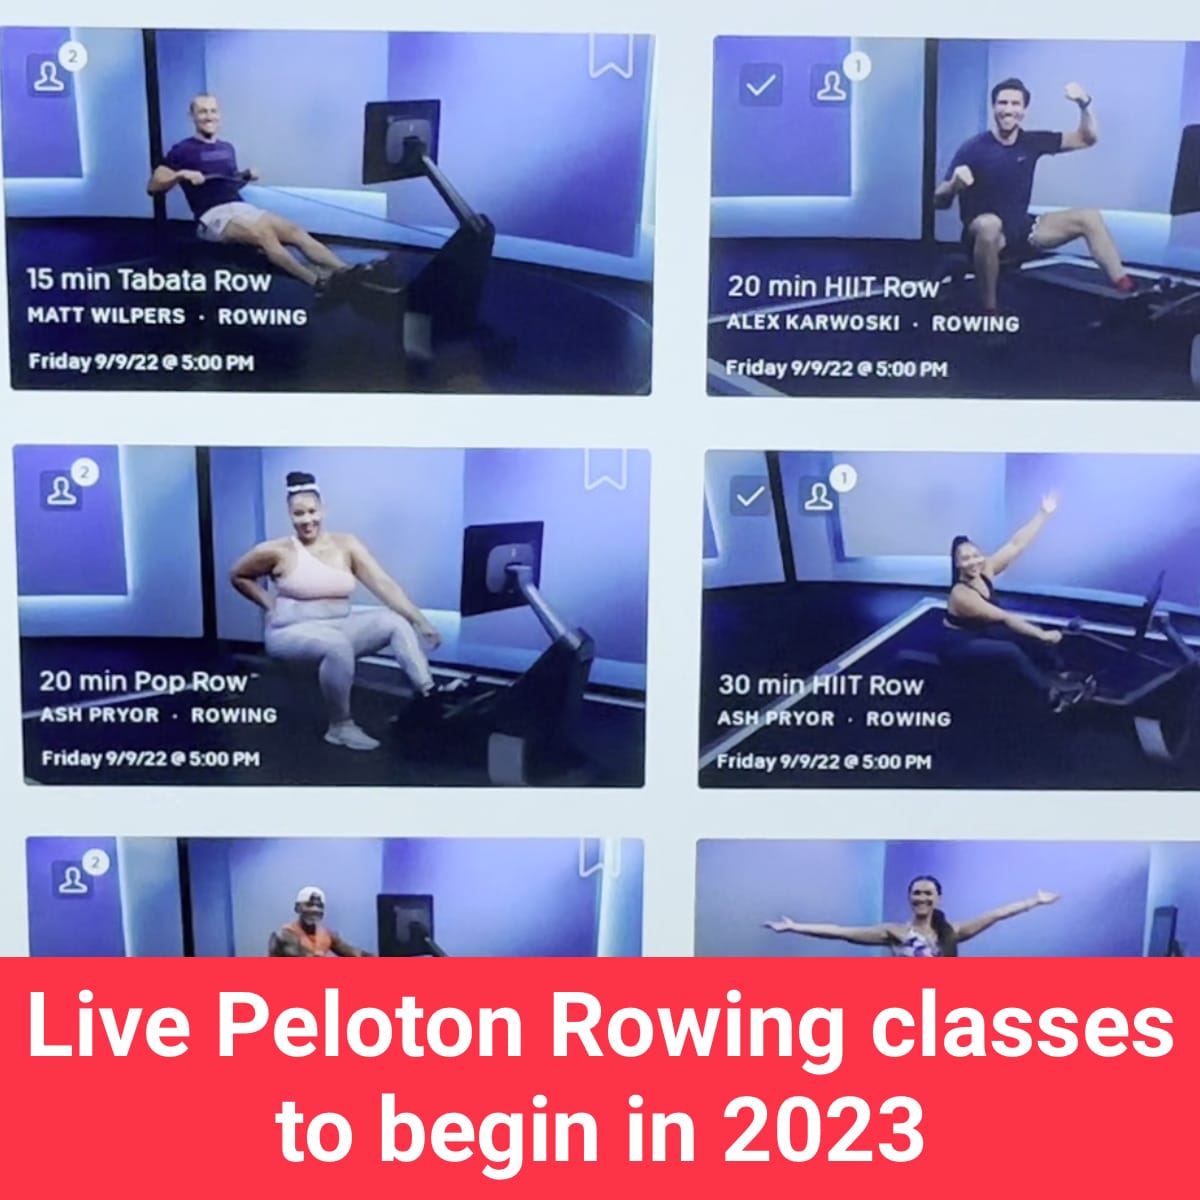 Live Peloton Rowing Classes to Begin in